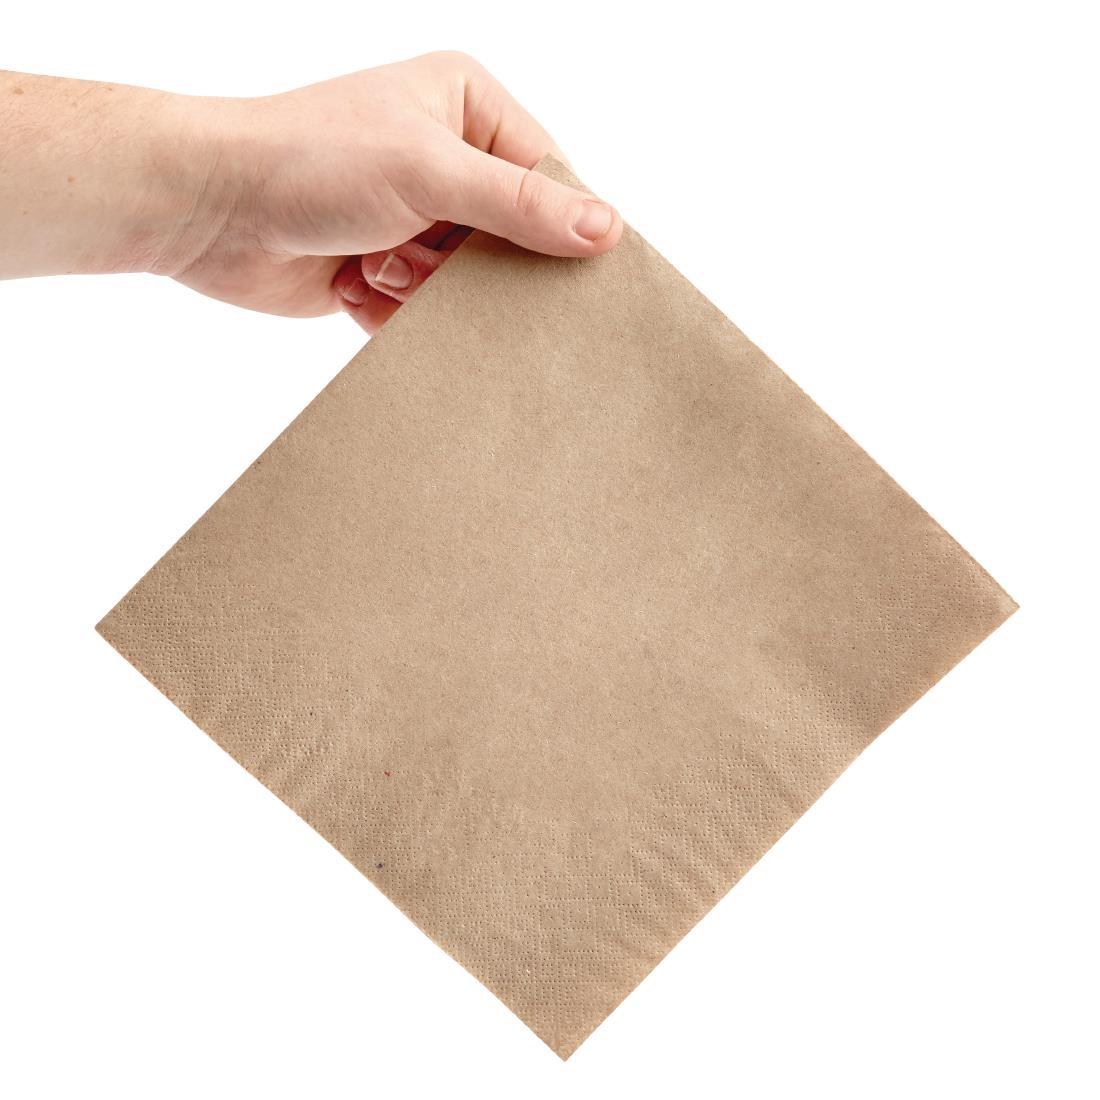 Fiesta Recyclable Recycled Dinner Napkin Kraft 40x40cm 2ply 1/4 Fold (Pack of 2000) - FE242  - 3